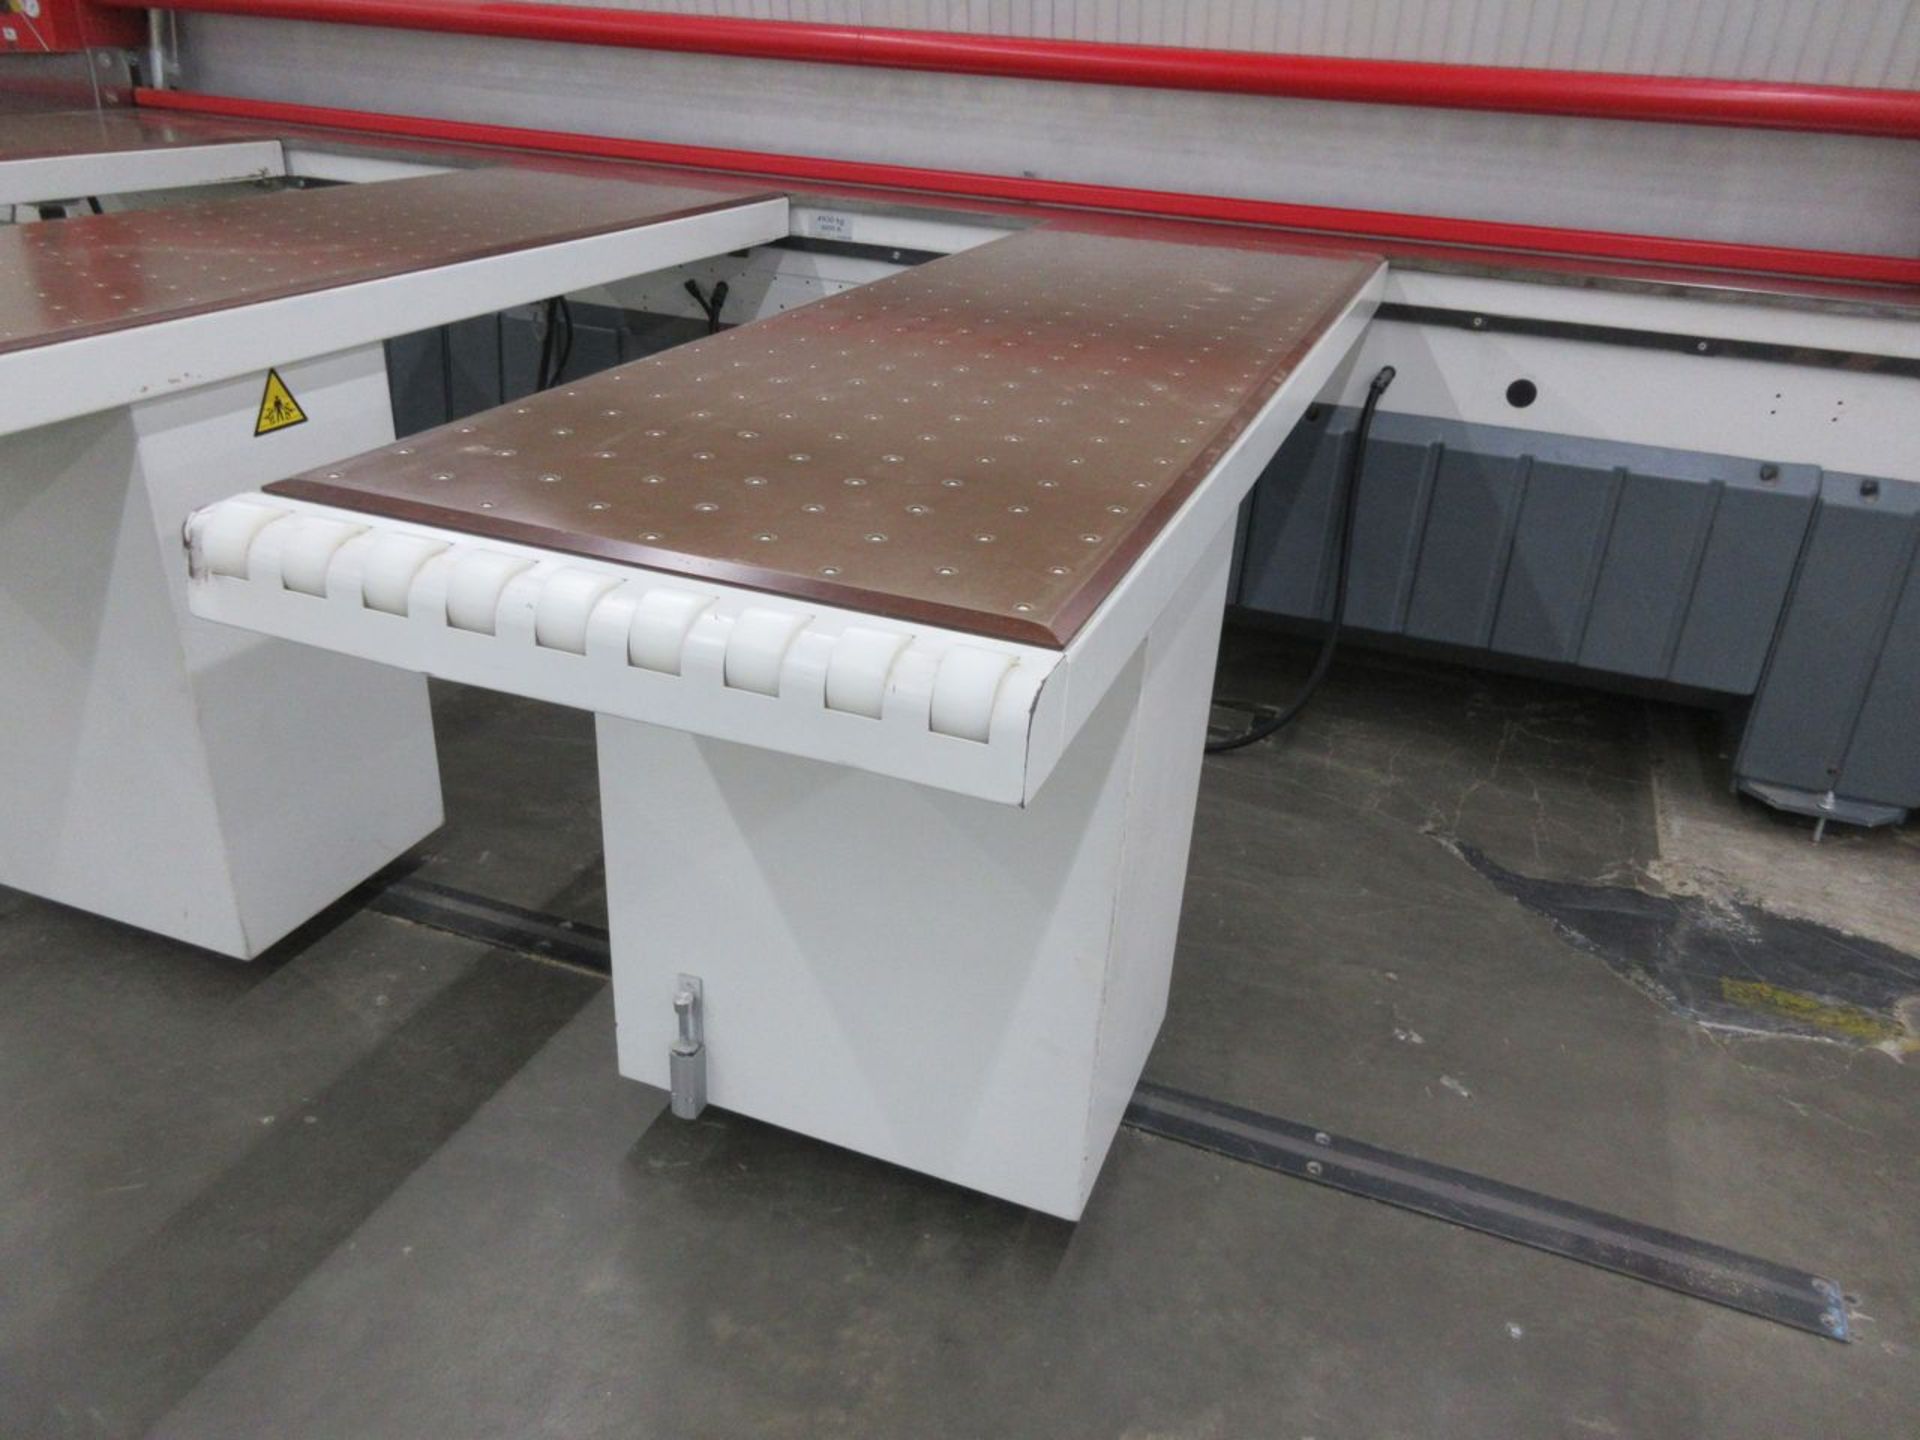 Schelling 14 ft. Model FH 6 430 CNC Rear Loading Horizontal Automatic Cut-to-Size Panel Saw, S/N: - Image 11 of 22